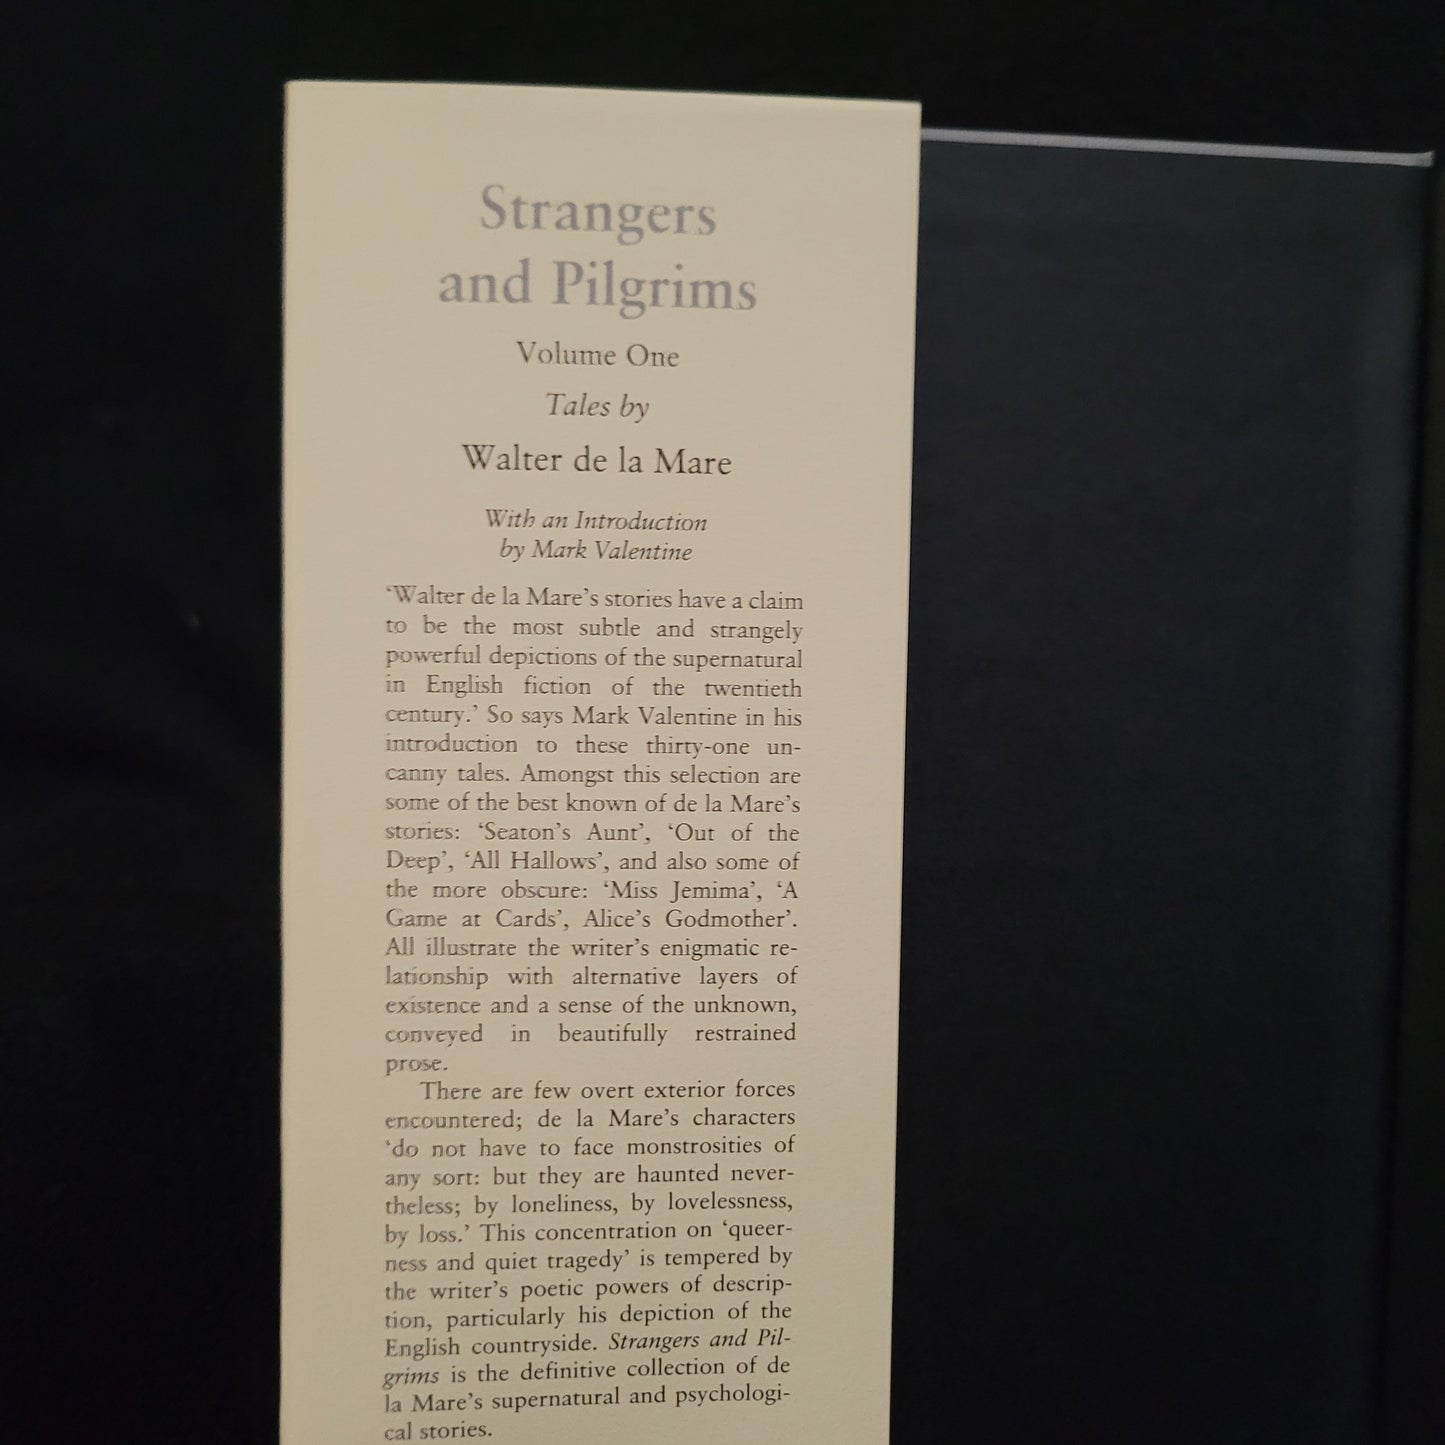 Strangers and Pilgrims: Tales by Walter de la Mare (Tartarus Press, 2022) Two Limited Edition Hardback Volumes in a Slipcase